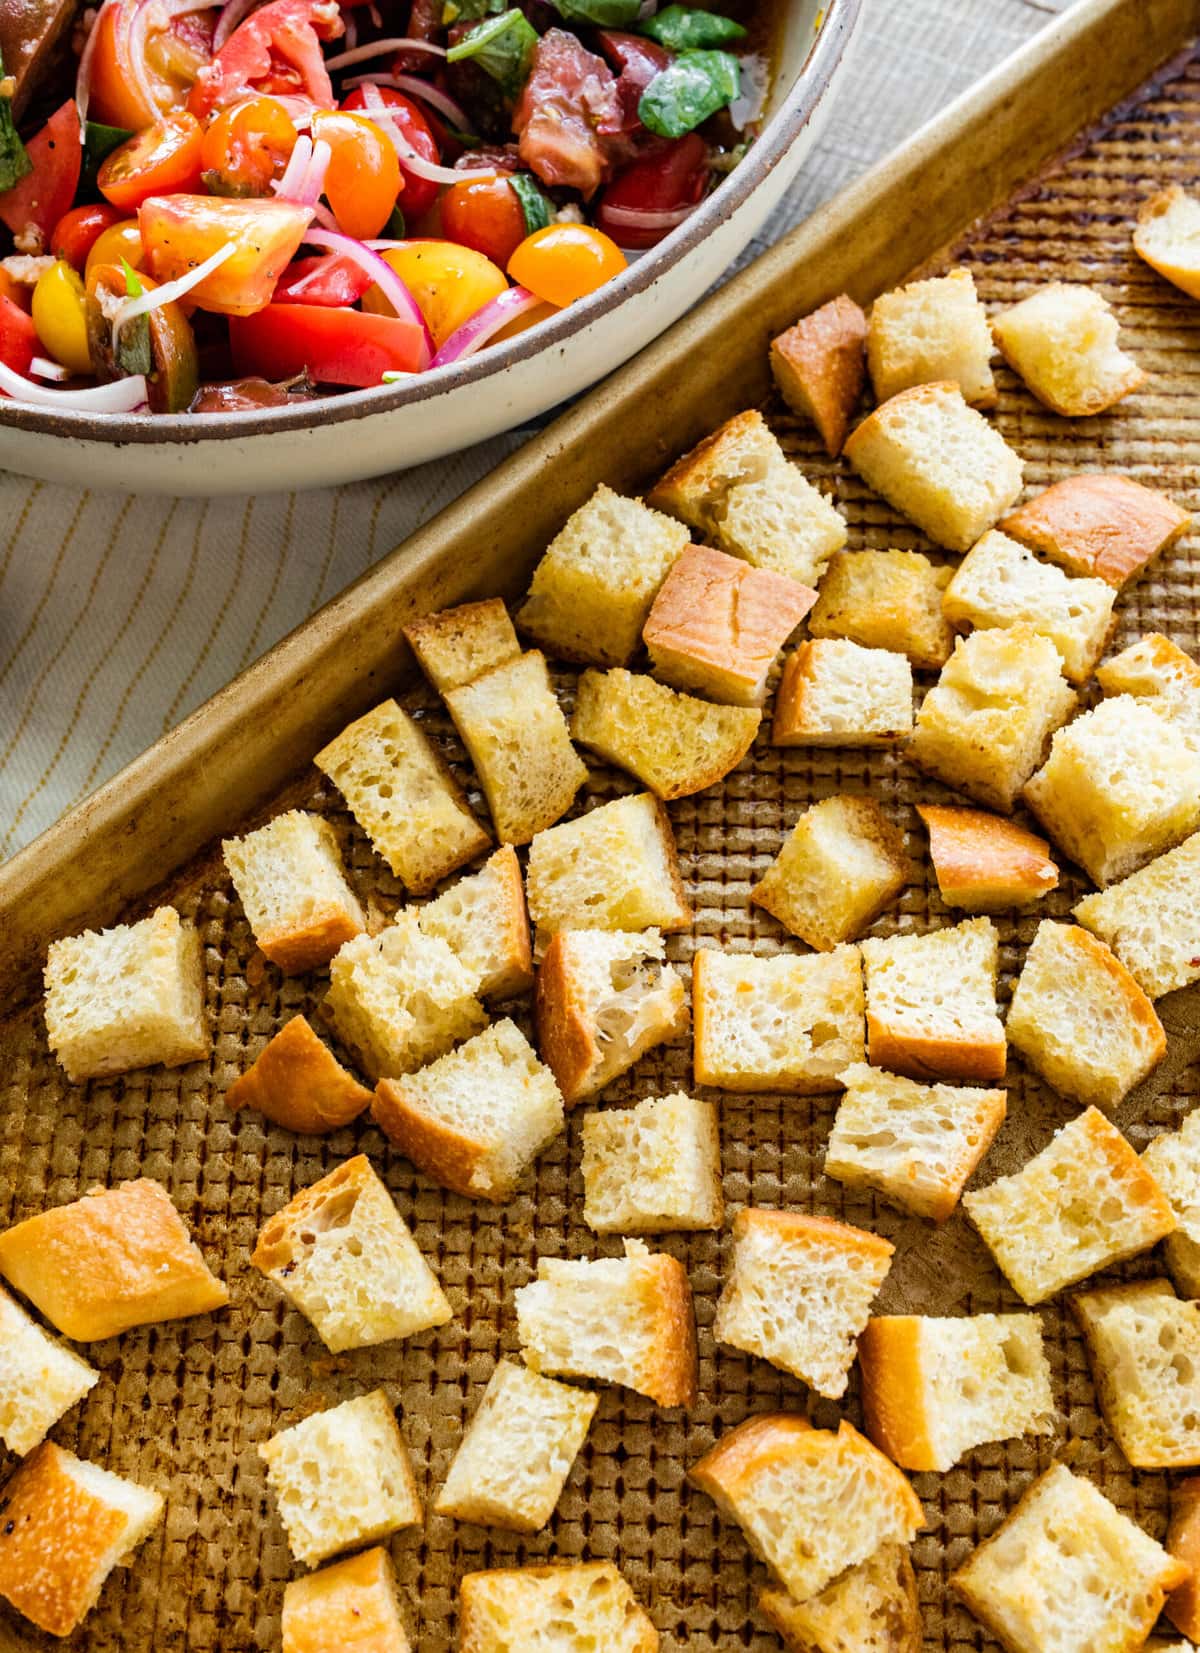 Best Summer Panzanella Salad Recipe (Bread & Tomato)- toasting the bread on a cookie sheet.